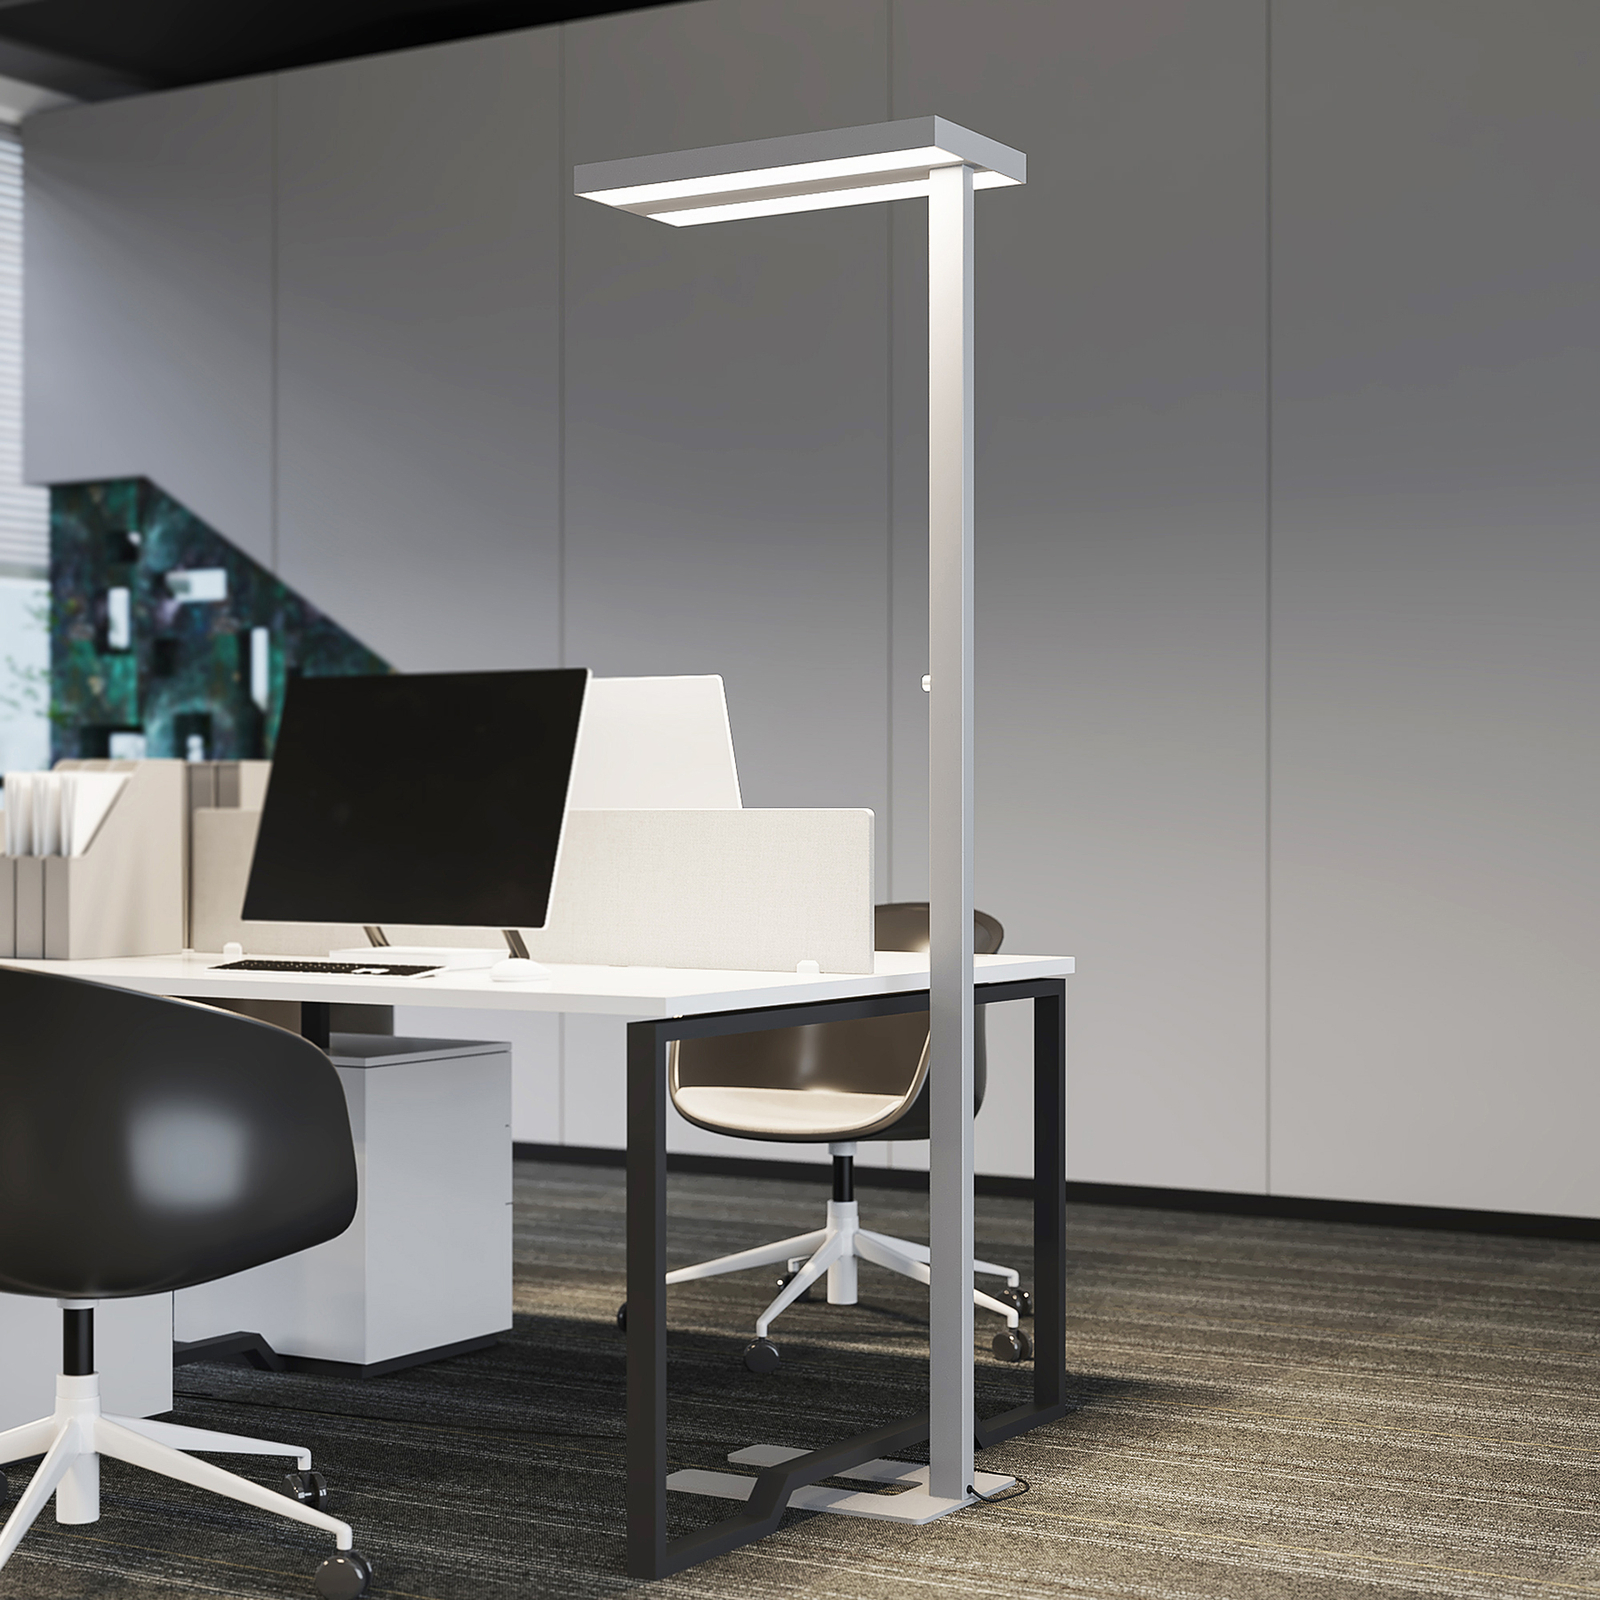 ELC Curina LED office floor lamp, dimmer, silver